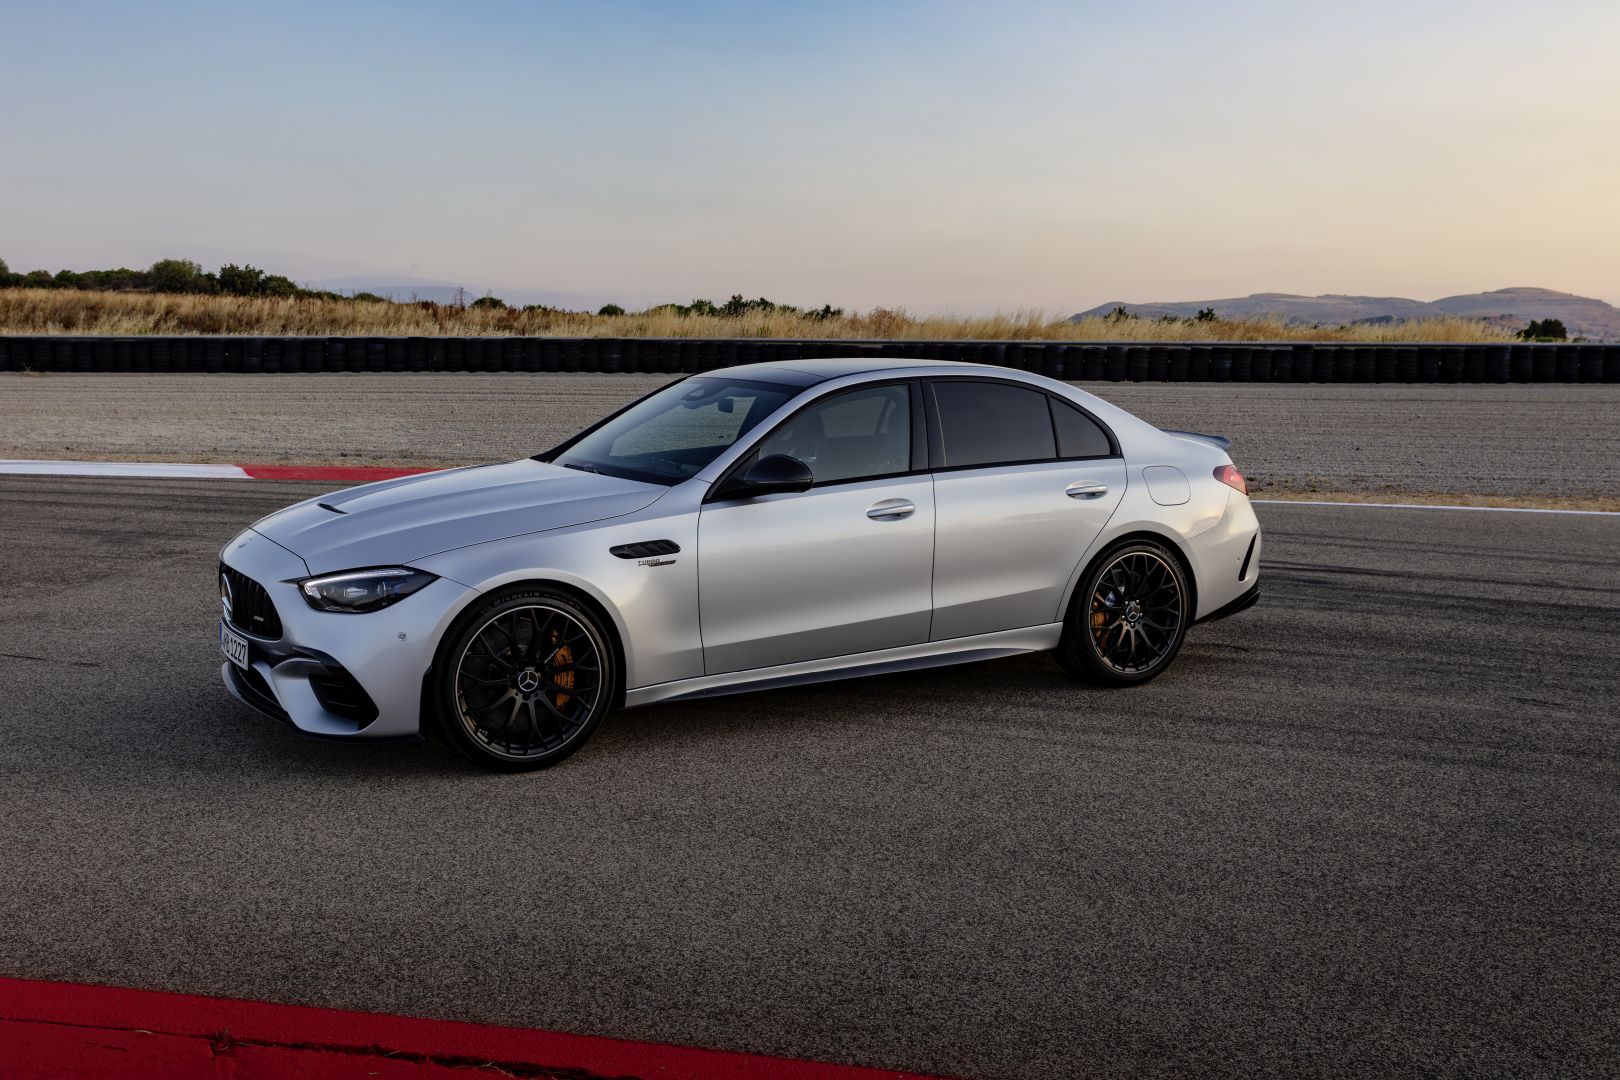 Mercedes Amg C63 S E Performance Specs And Photos 2022 2023